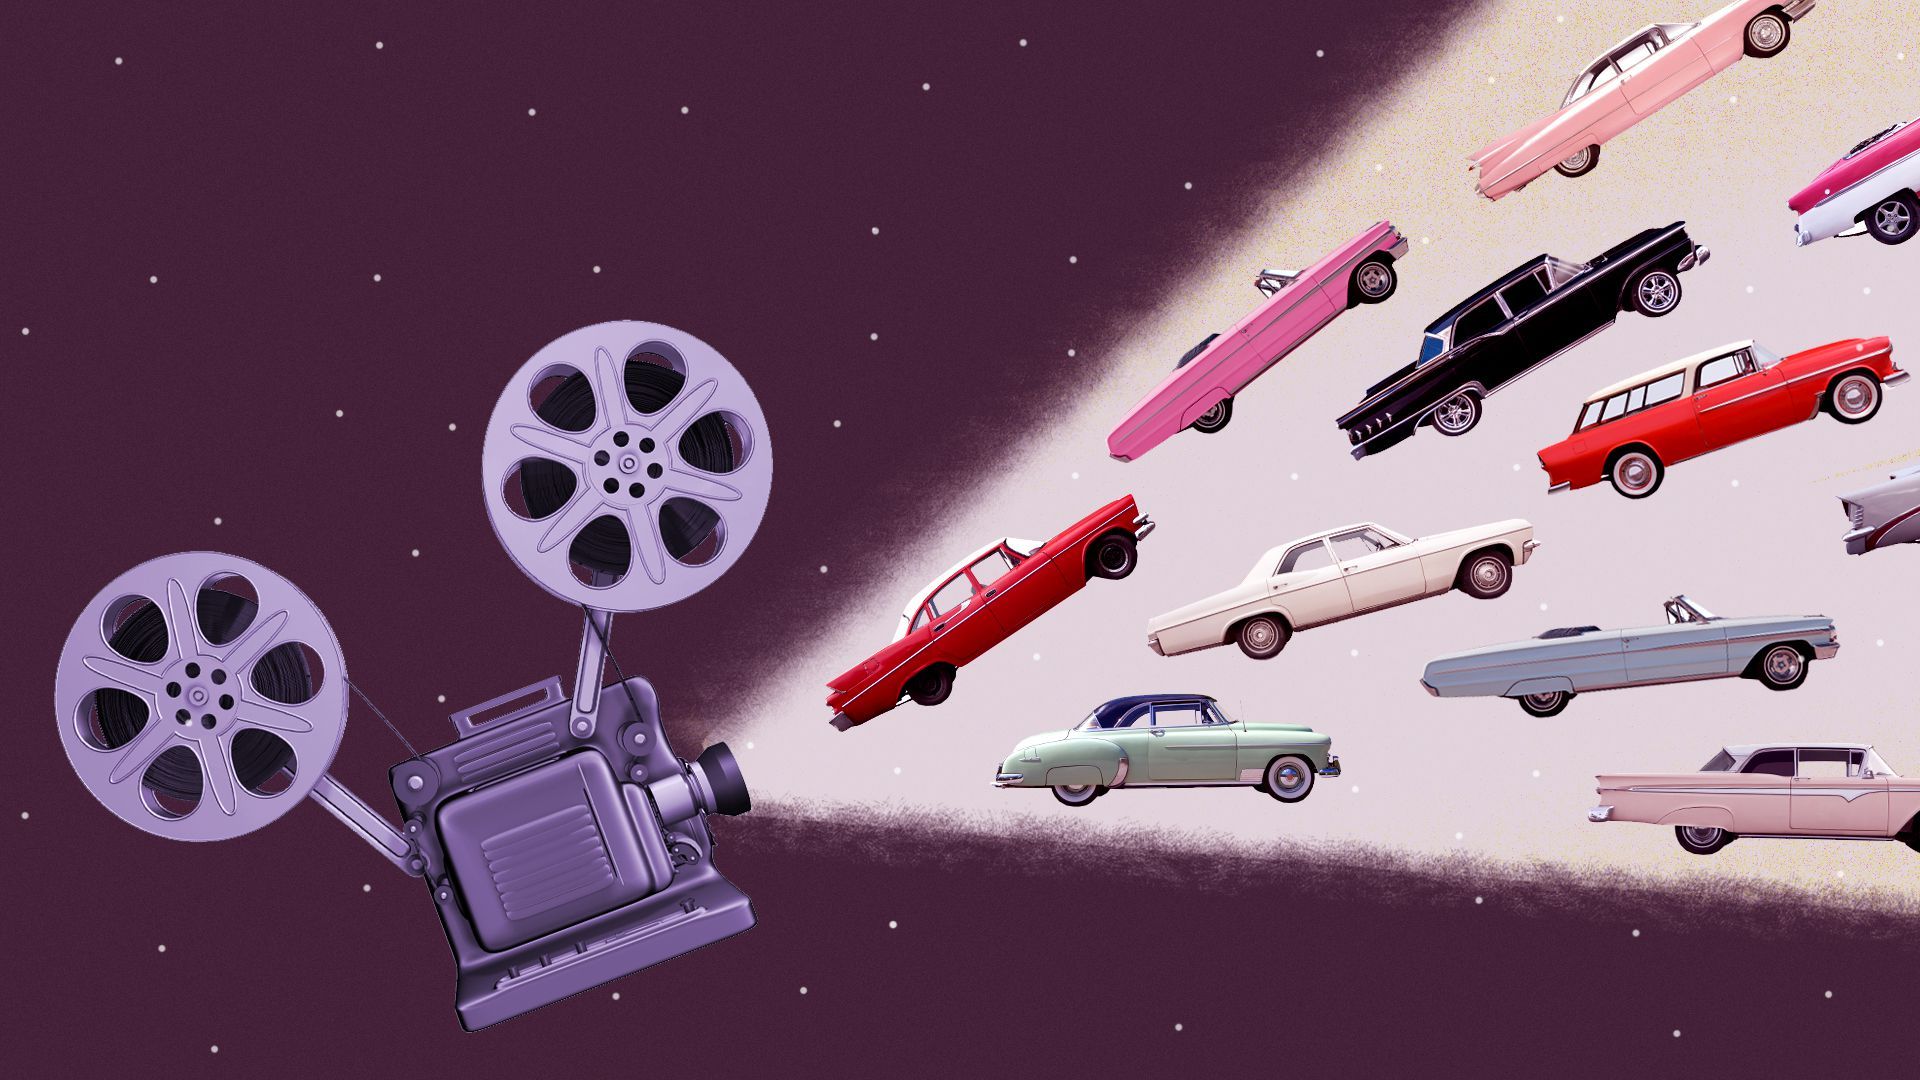 Illustration of a movie projector projecting light and vintage cars against a night sky